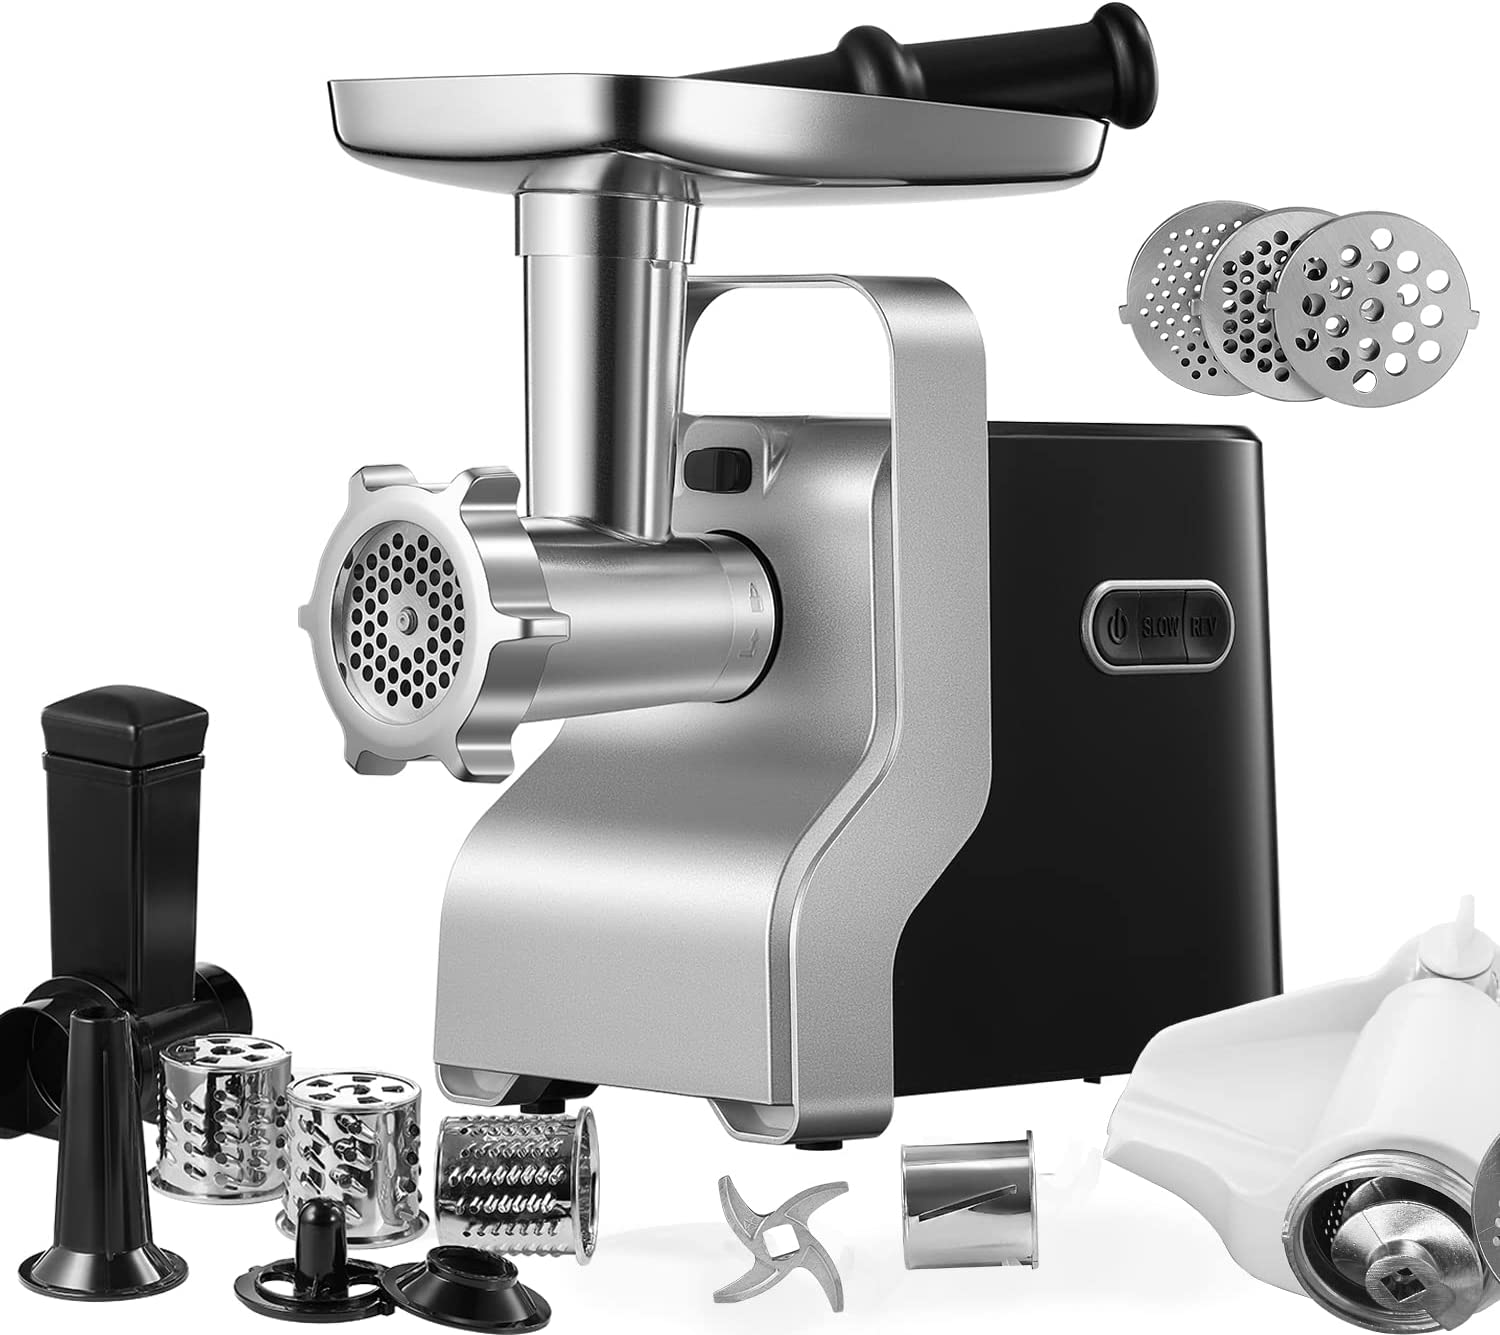 RTEY Meat Grinder Electric 5 in 1 Sausage Attachment with 3 Stainless Steel Hole Discs (3.5 7 mm), 2200 W Blocking Power